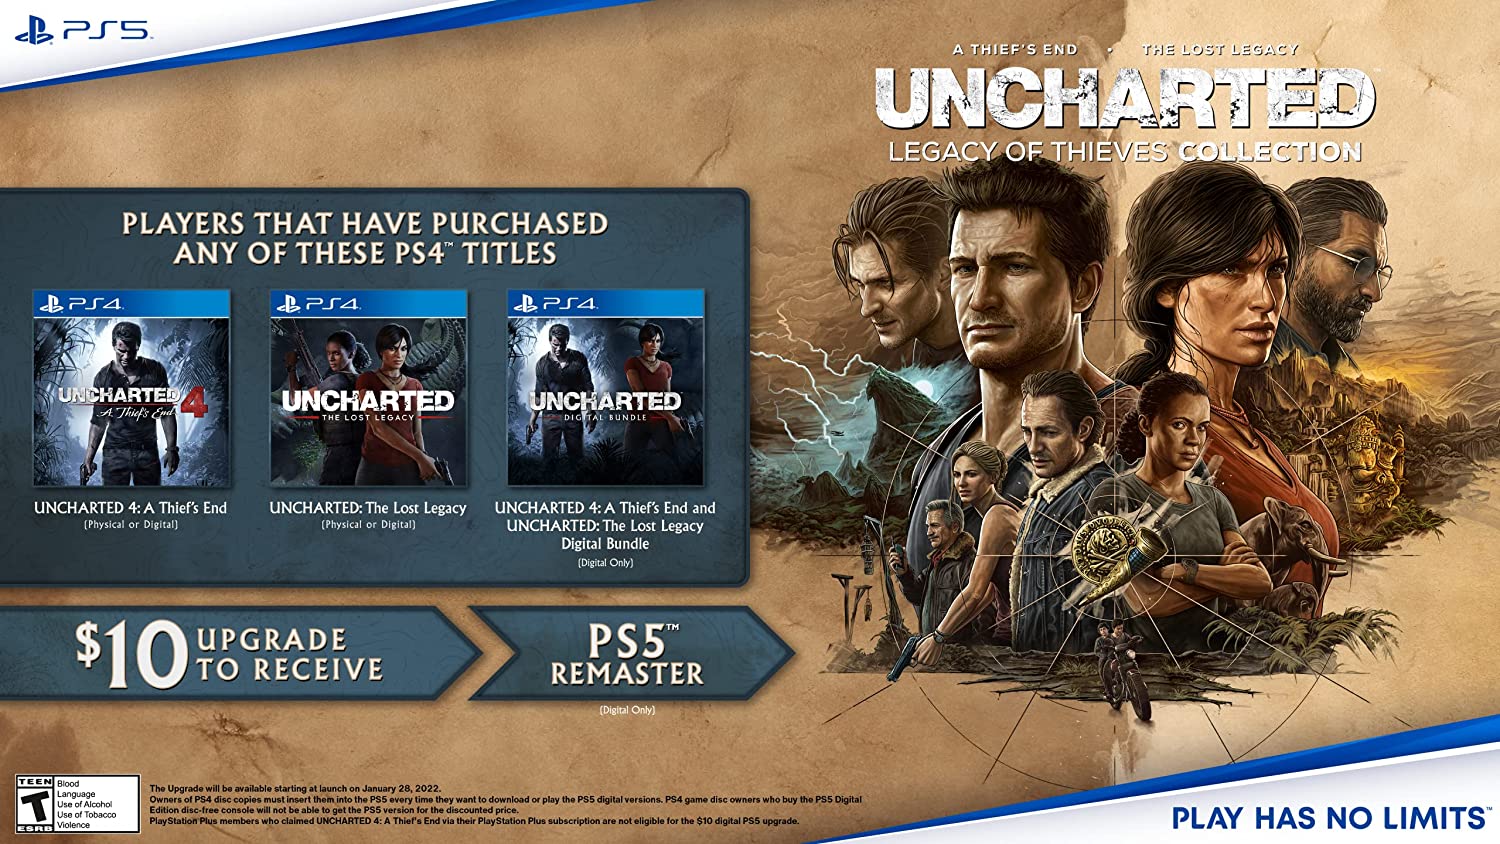 UNCHARTED: Legacy of Thieves Collection for PlayStation 5